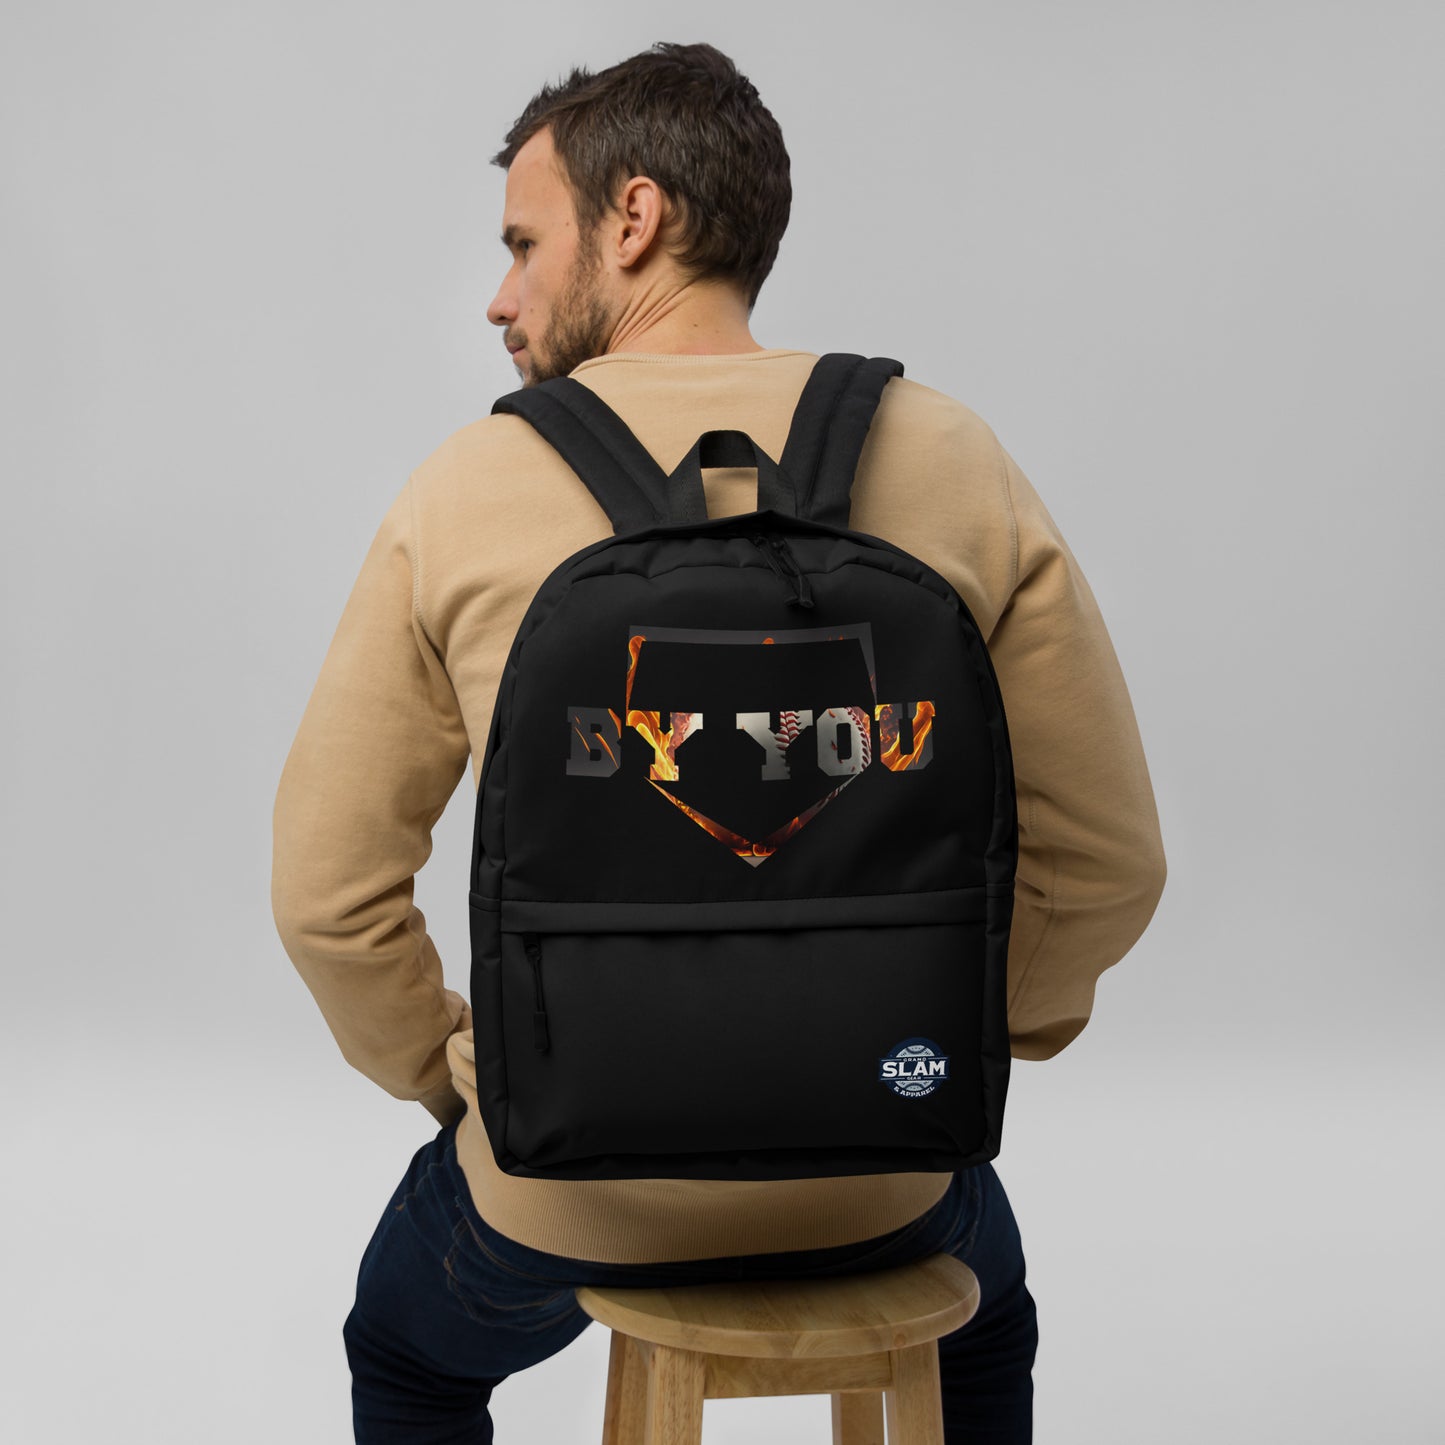 Versatile Medium-Sized Backpack Black - Ideal for Daily Use & Sports